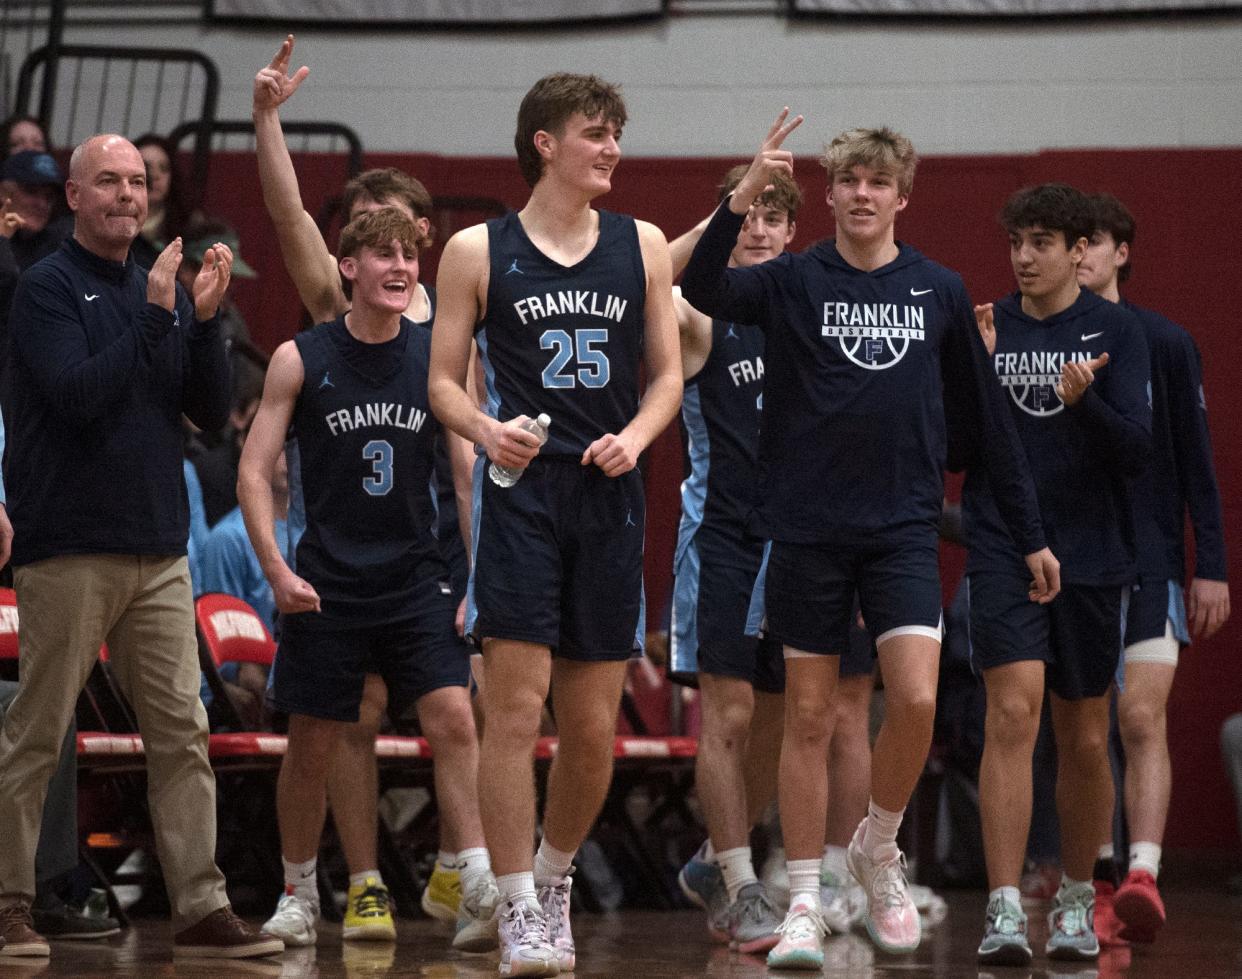 The Franklin High School basketball team, including seniors #3, Bradley Herndon, and #25, Sean O'Leary, was all smiles as the first half ended at Milford, Jan. 26, 2024. Franklin went on to win, 81-53.